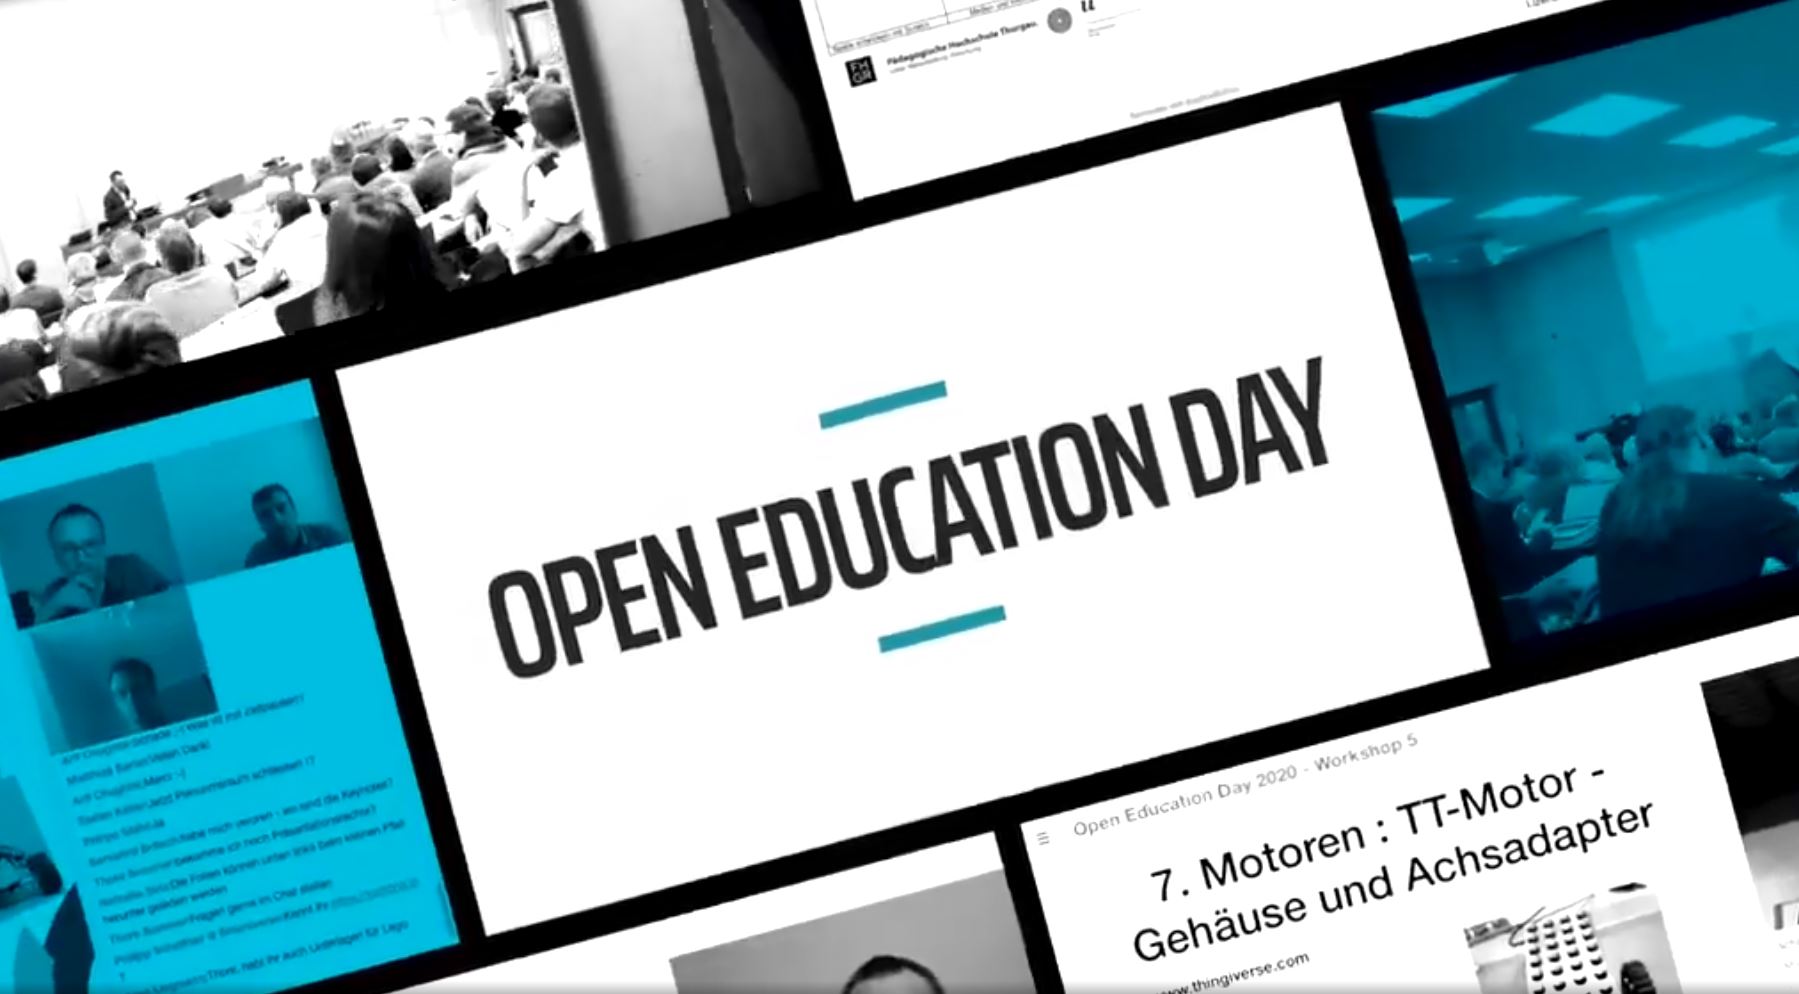 (c) Openeducationday.ch